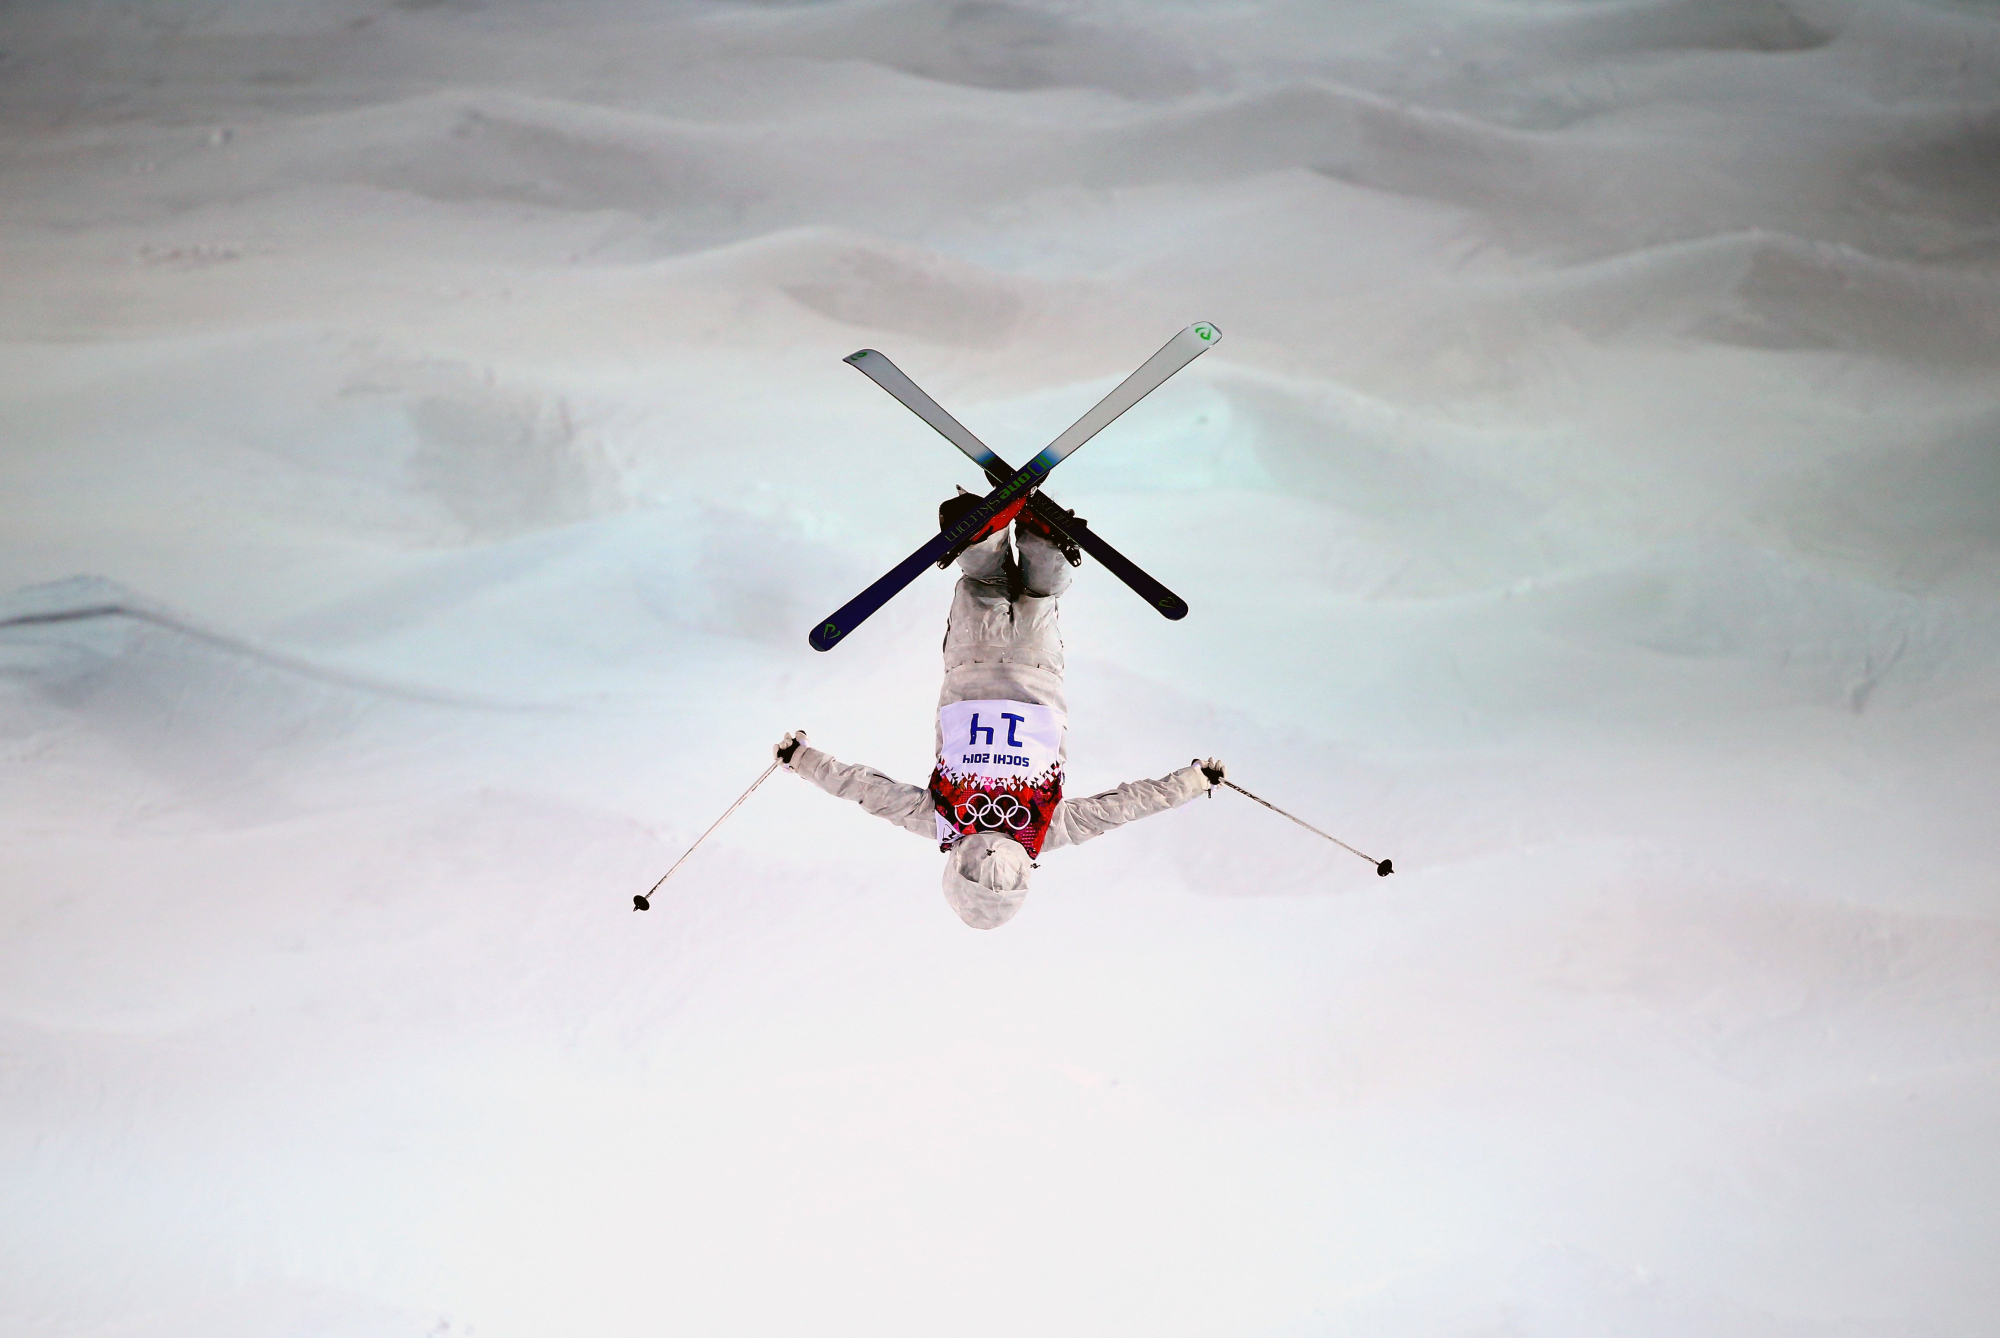 Junko Hoshino of Japan competes during Ladies' Moguls Qualification at Rosa Khutor Extreme Park on February 6, 2014.